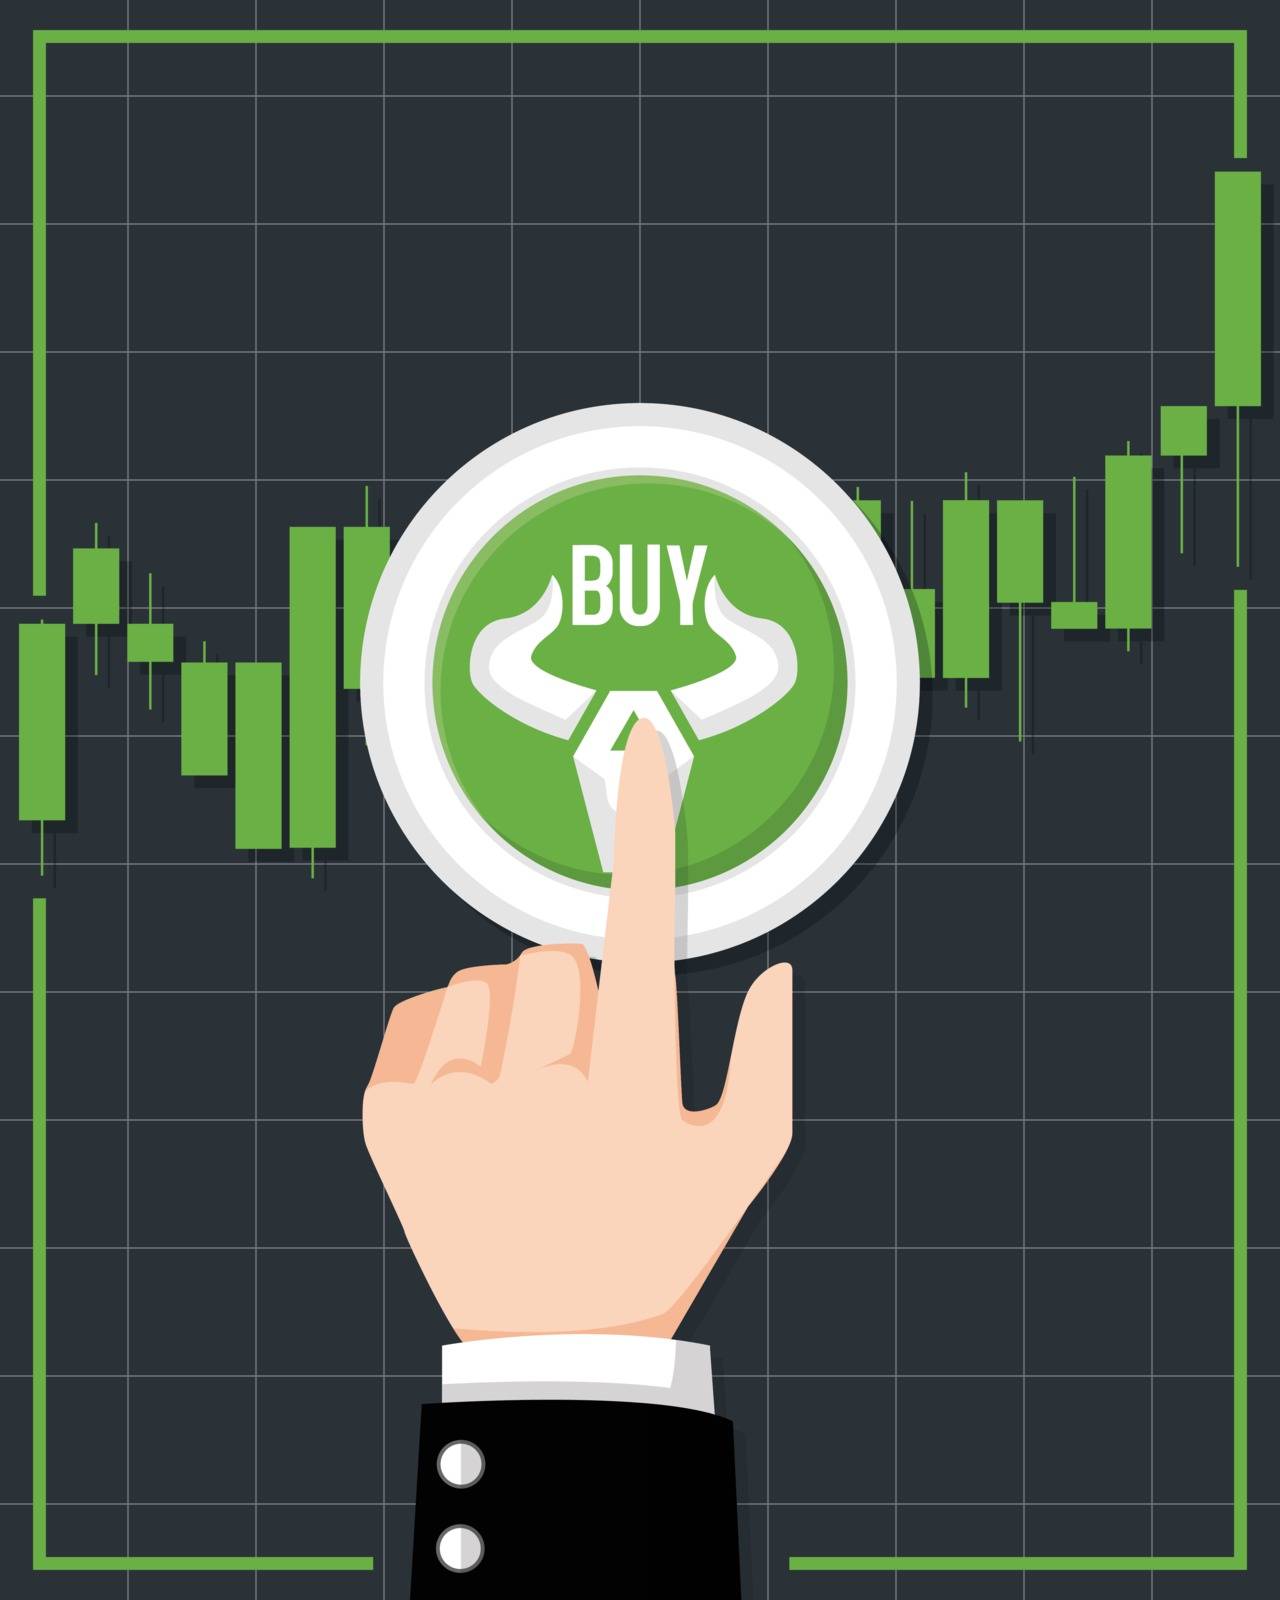 Bullish stock market vector. Fund, forex or commodity price charts. Design by financial chart elements and business man push buy botton with bull symbol, growing investment trading. Up trend concept